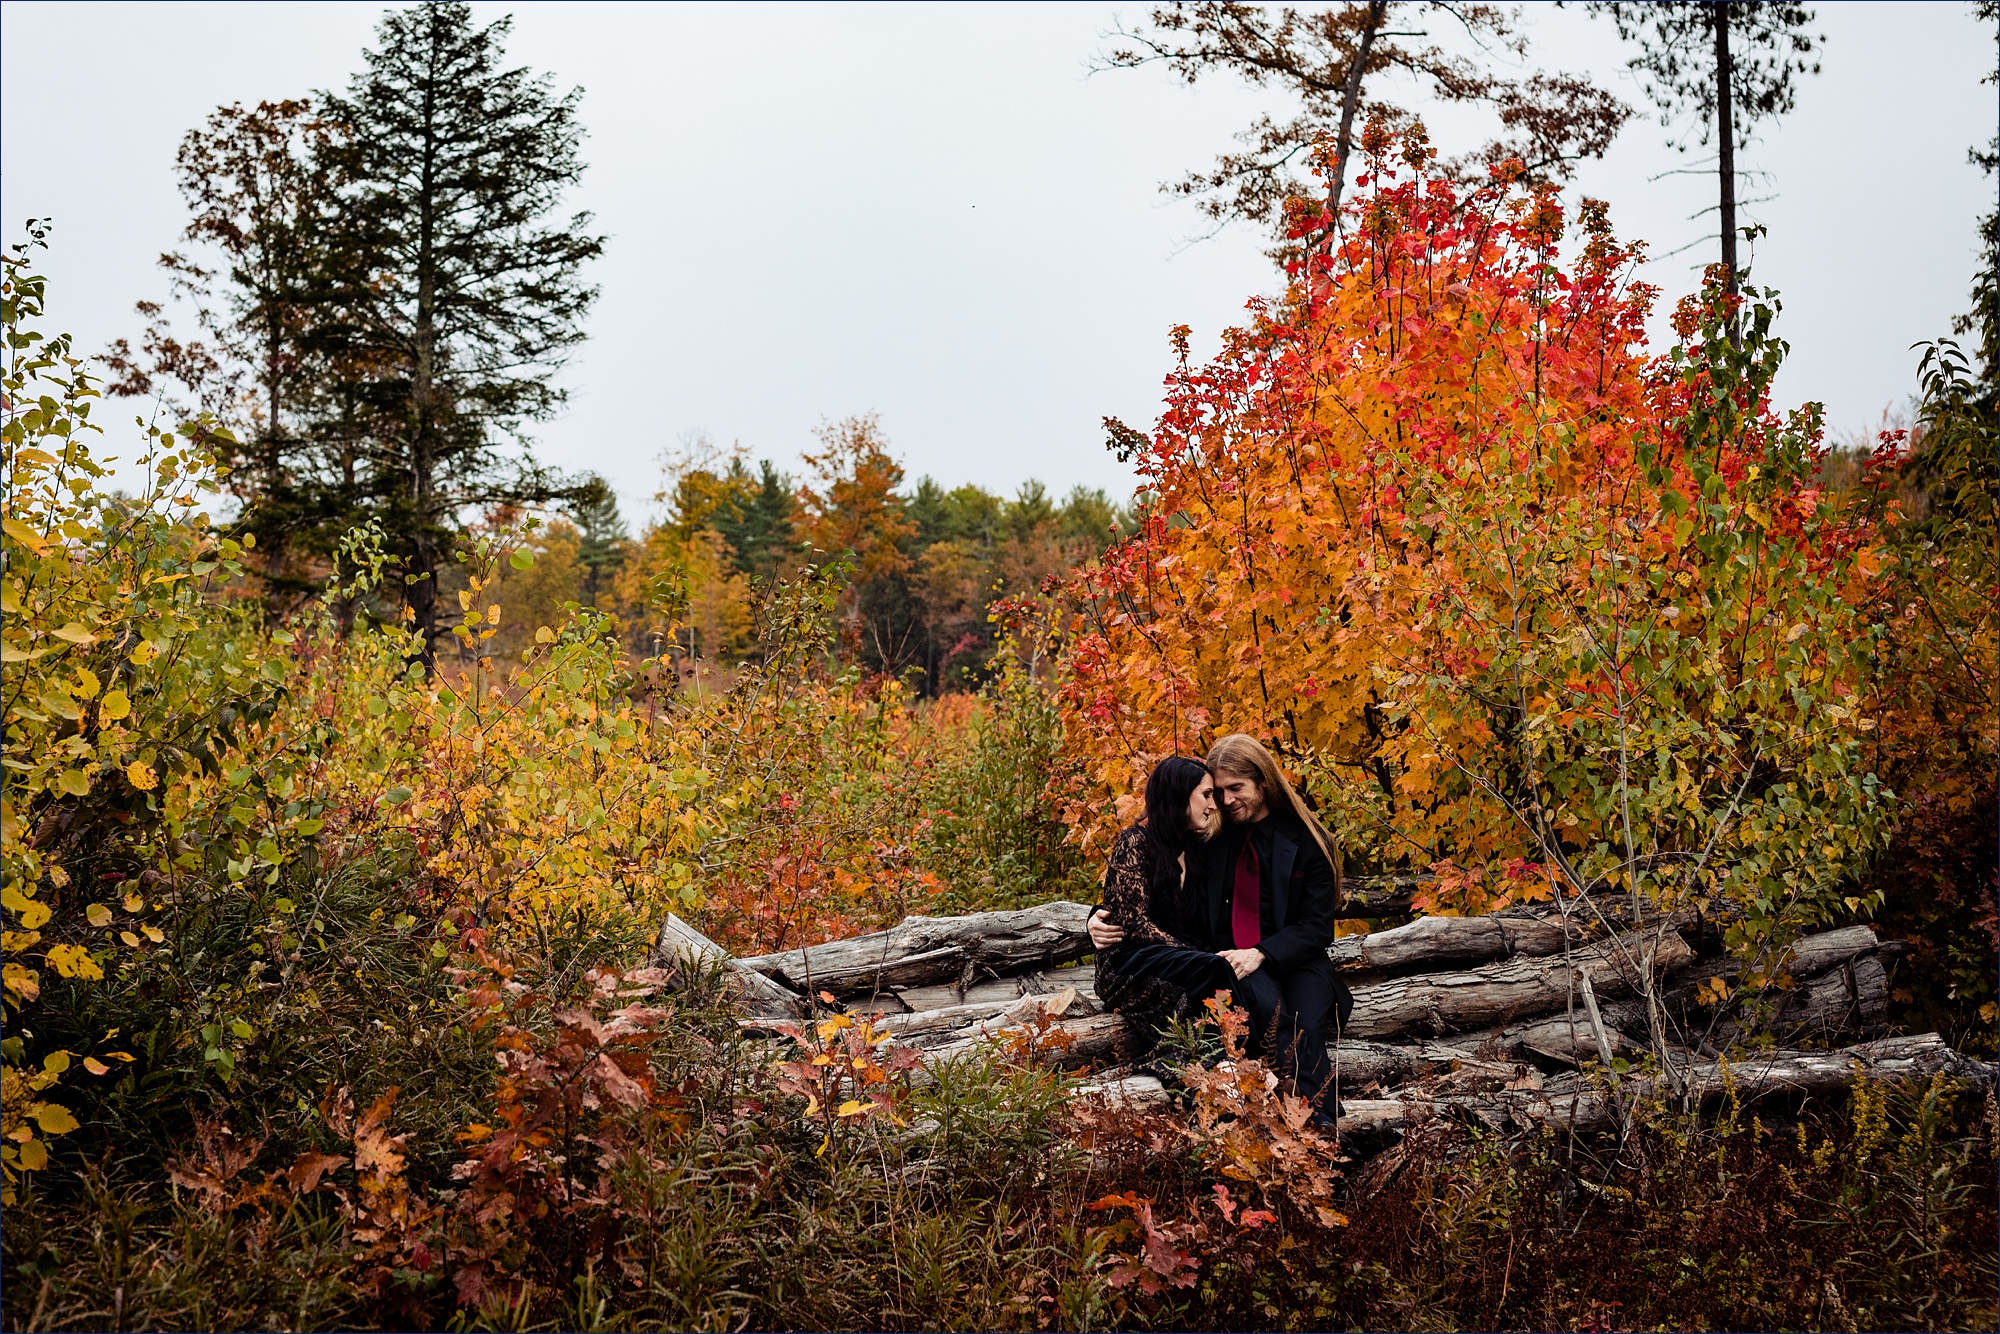 The bride and groom sit among the fall colored leaves and get close together on their New Hampshire wedding day